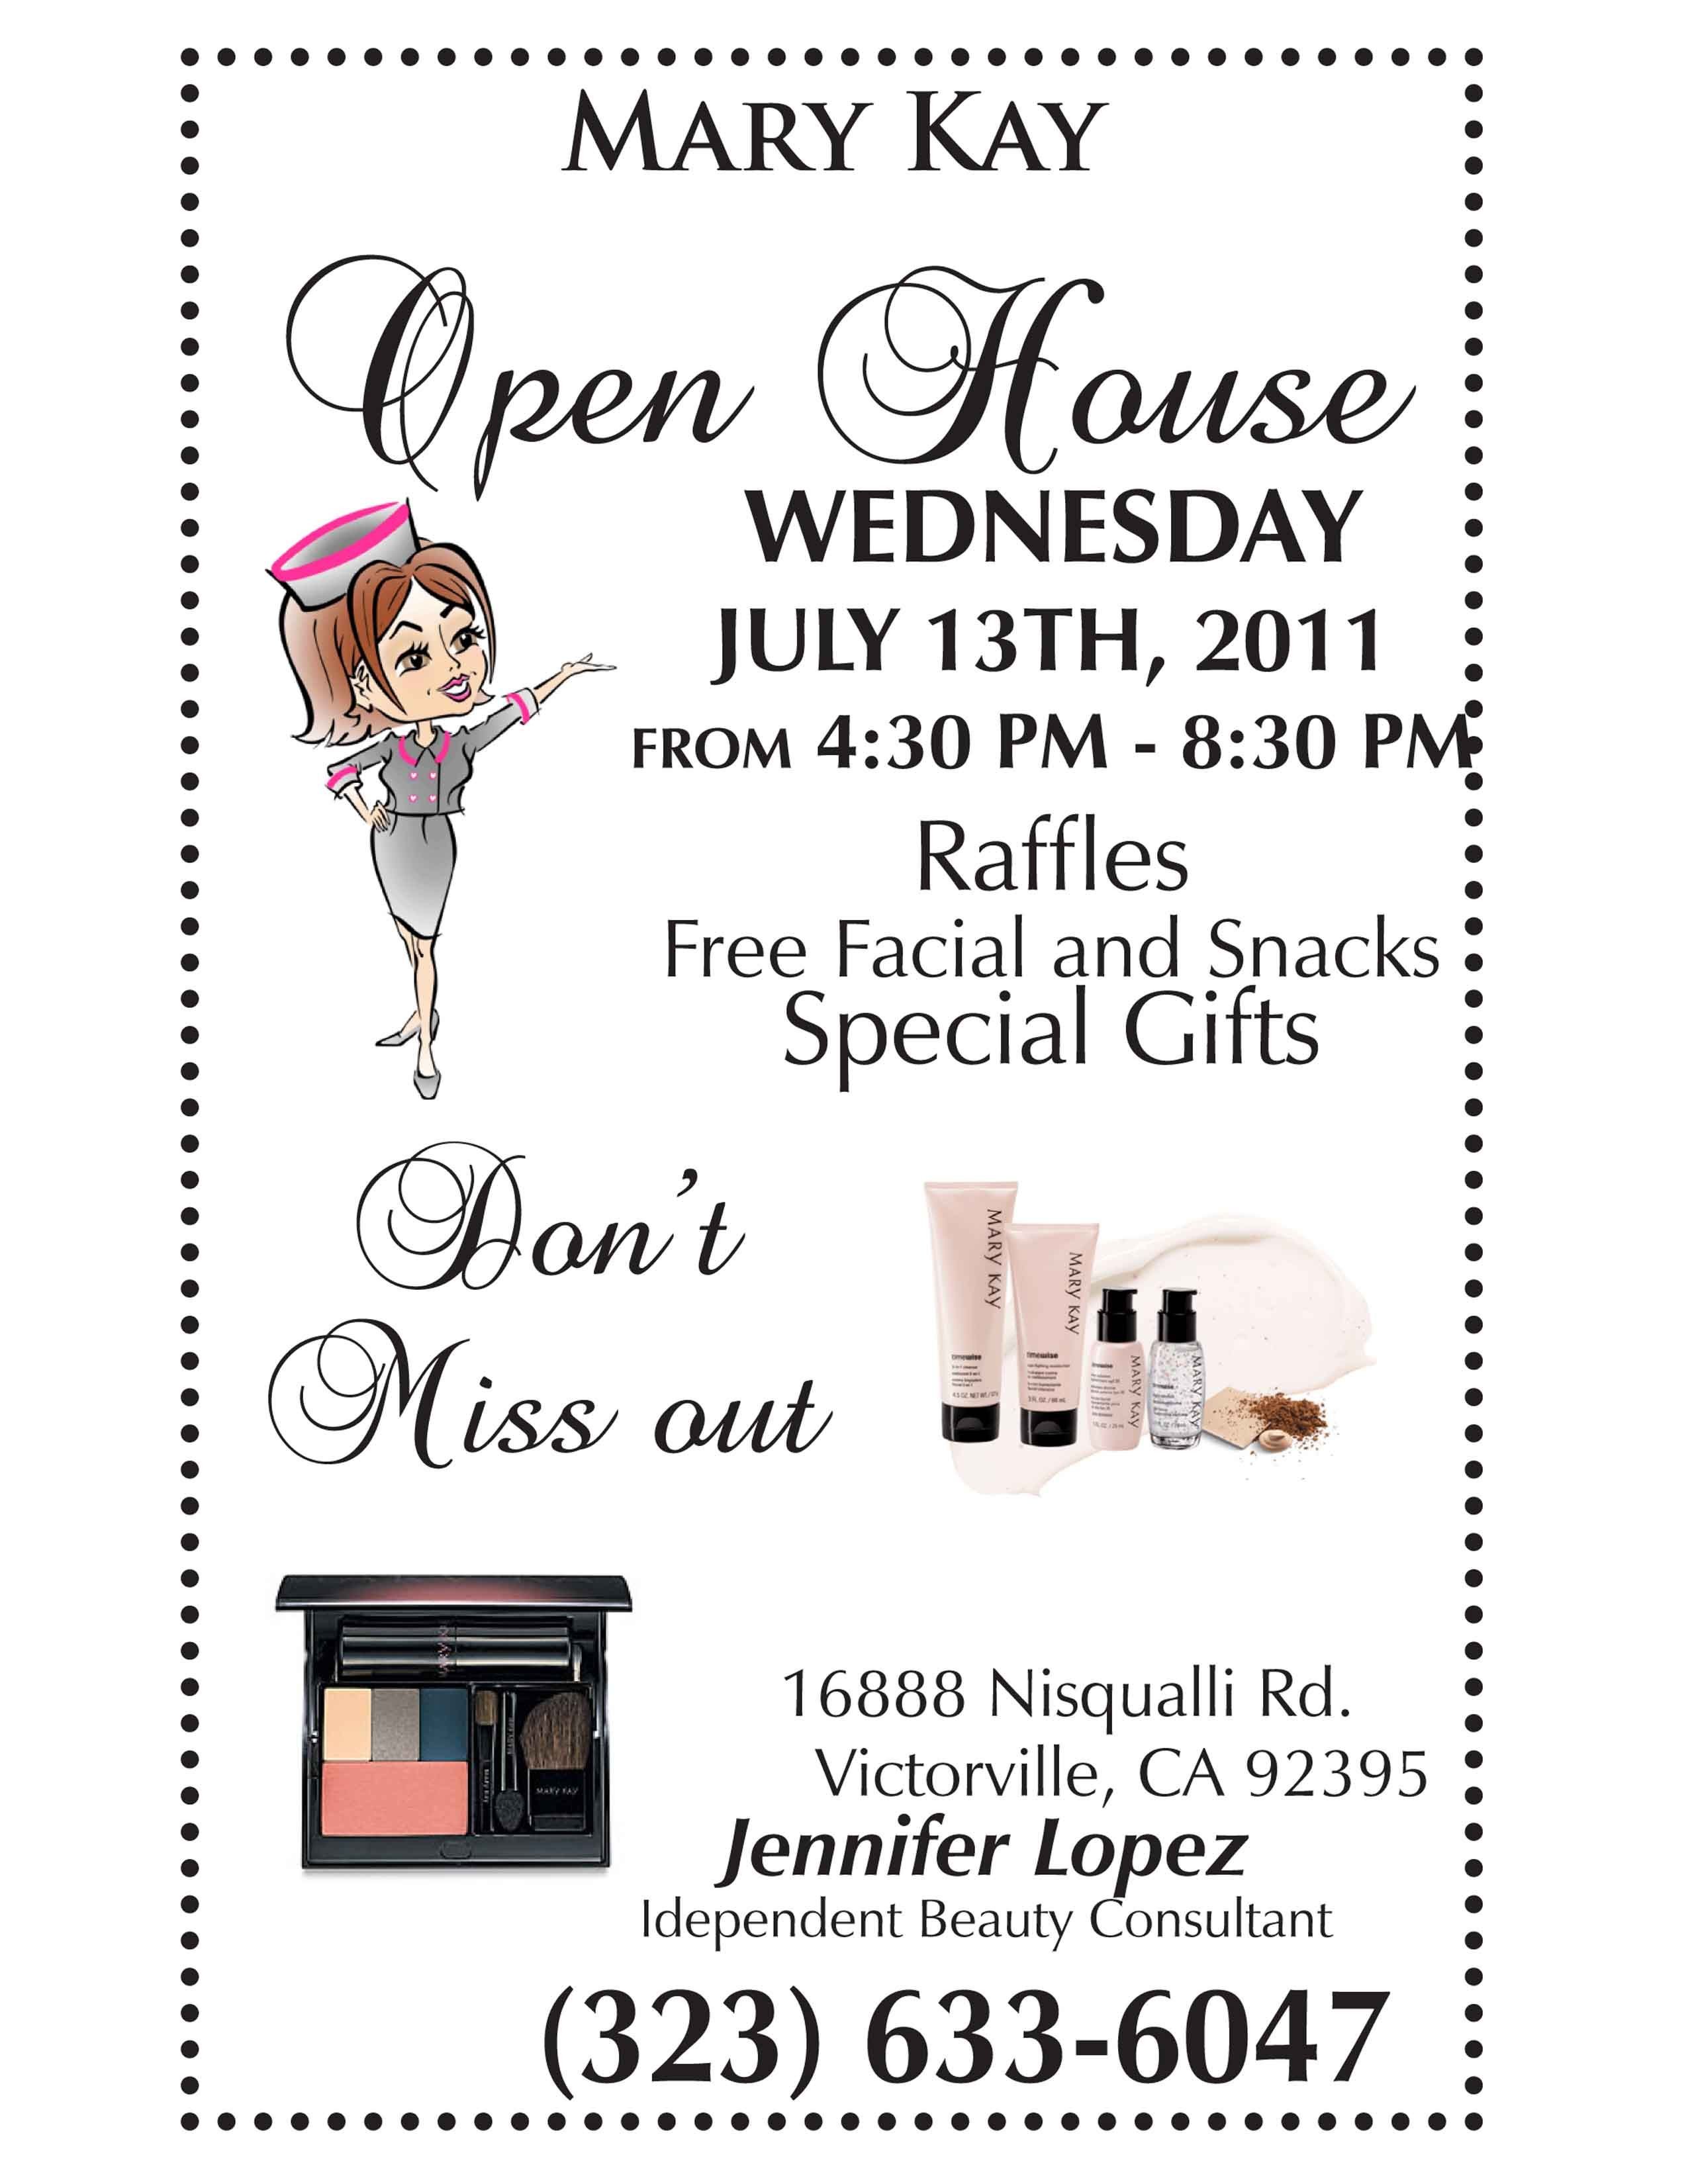 mary kay open house flyer template Google Search